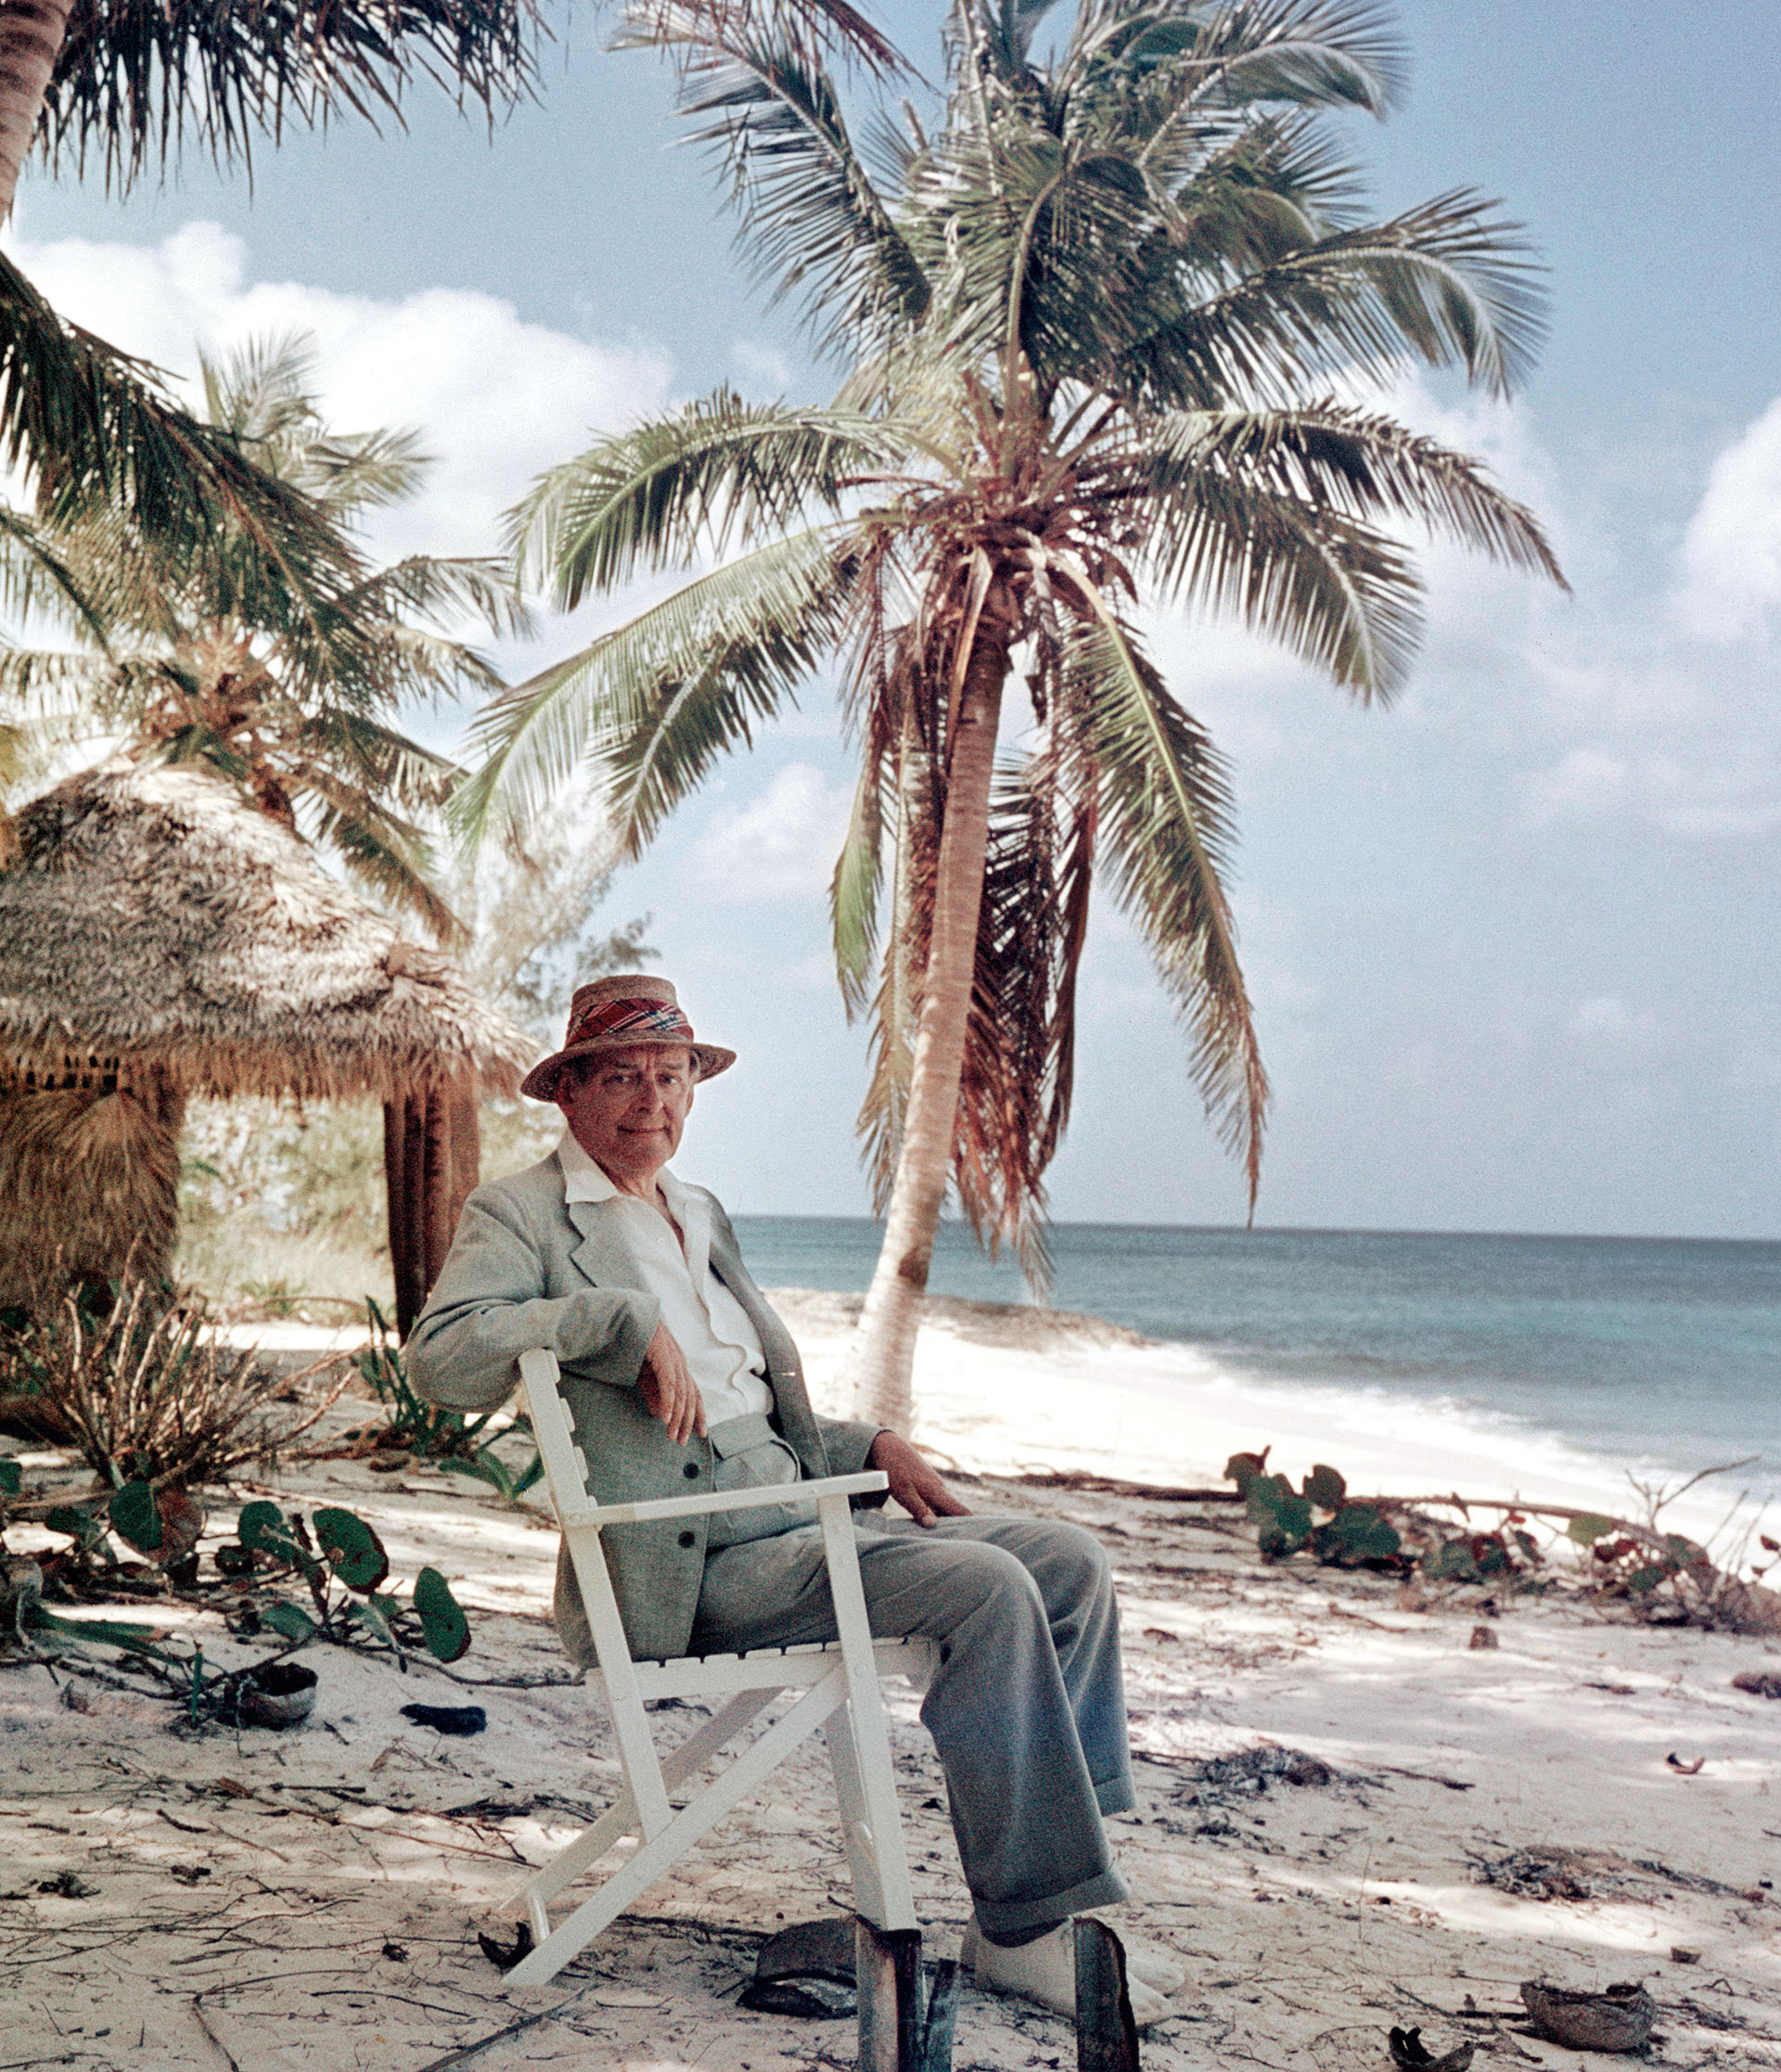 Anglo-American poet and playwright TS Eliot at Love Beach, New Providence Island, in 1957 (Photo: Slim Aarons/Getty Images) 